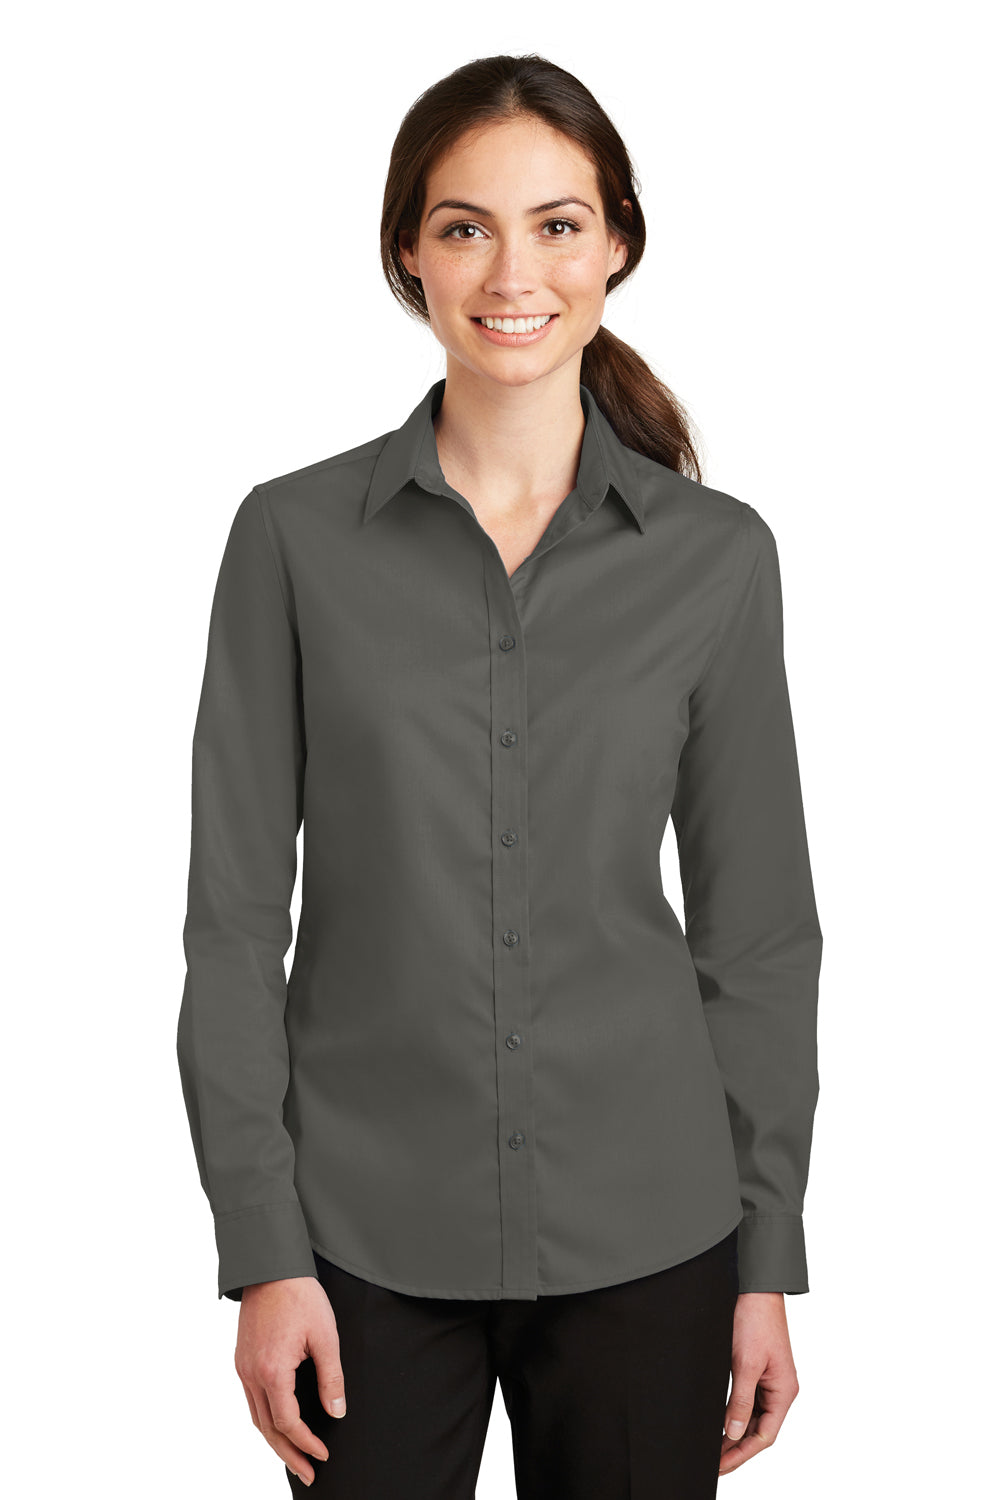 Port Authority L663 Womens SuperPro Wrinkle Resistant Long Sleeve Button Down Shirt Sterling Grey Front